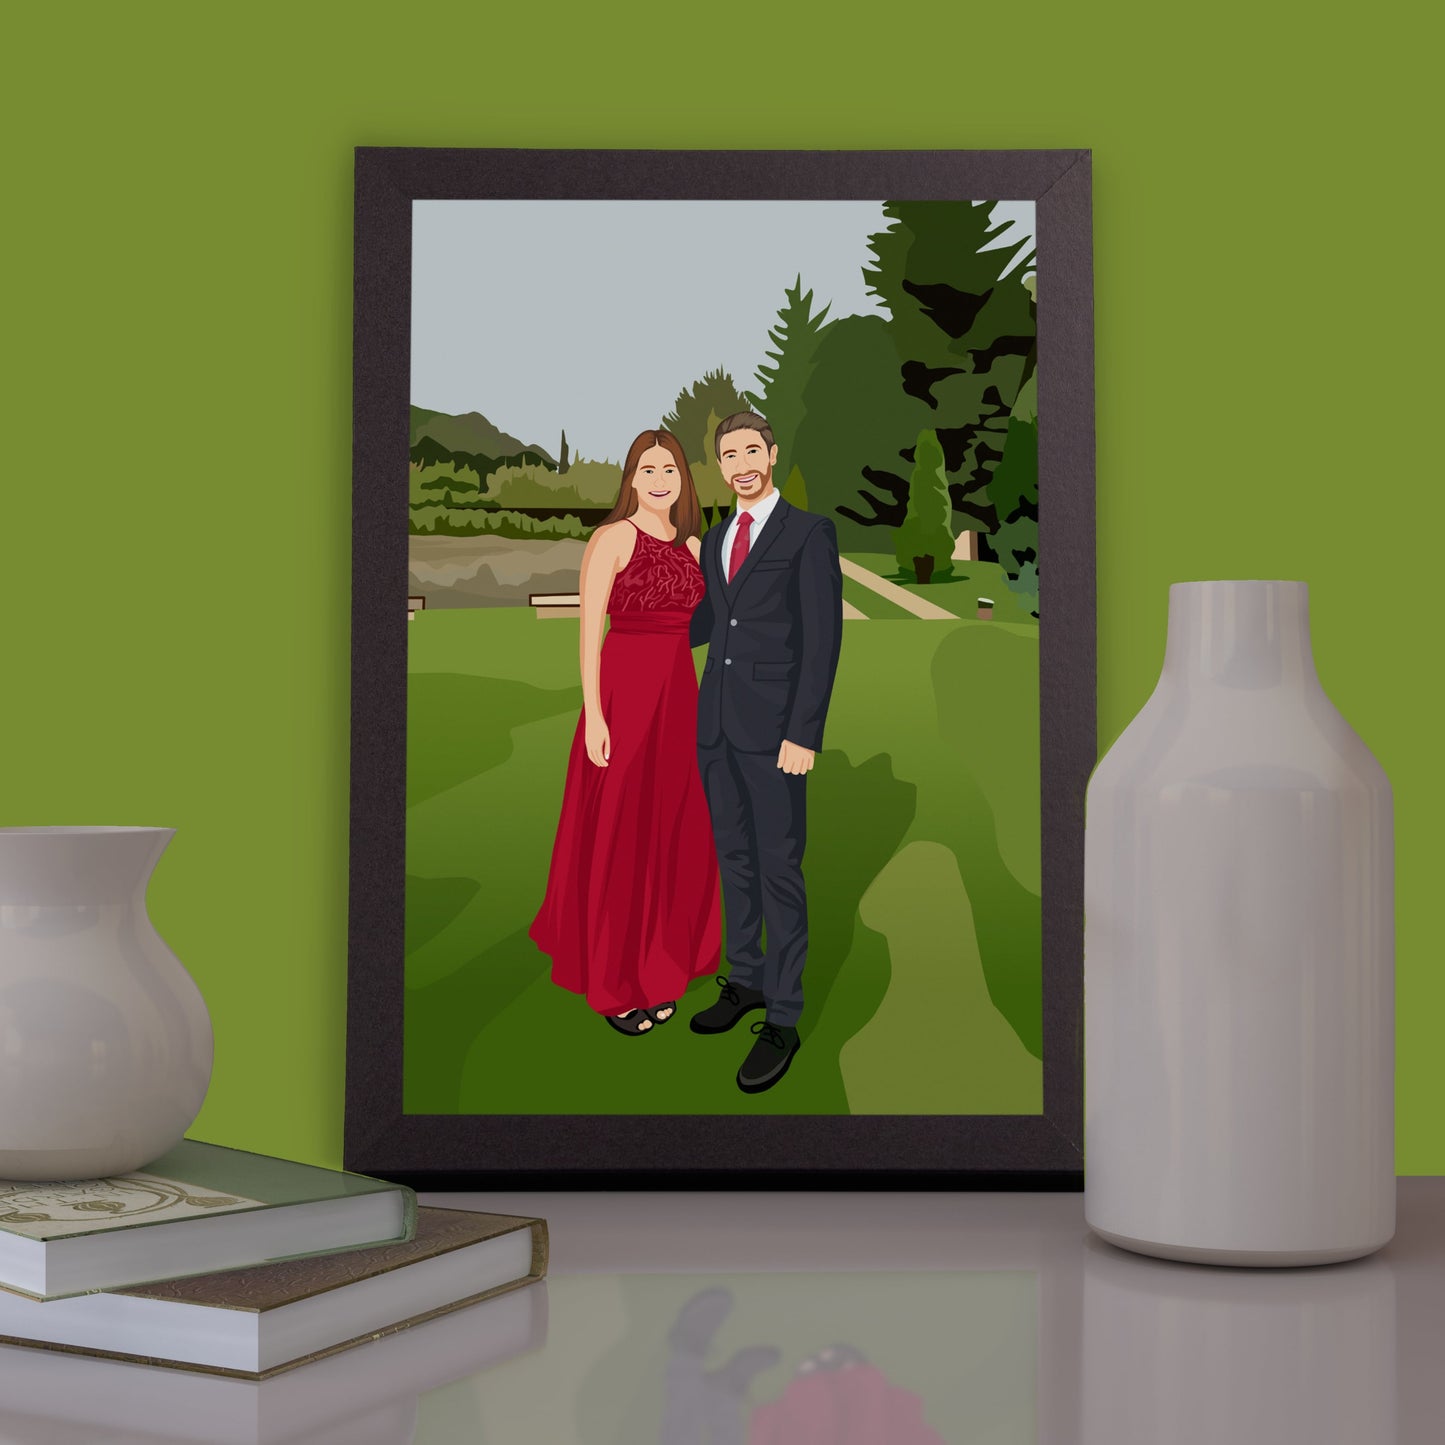 Gifts for Weddings - Personalized Cartoon Illustrations 